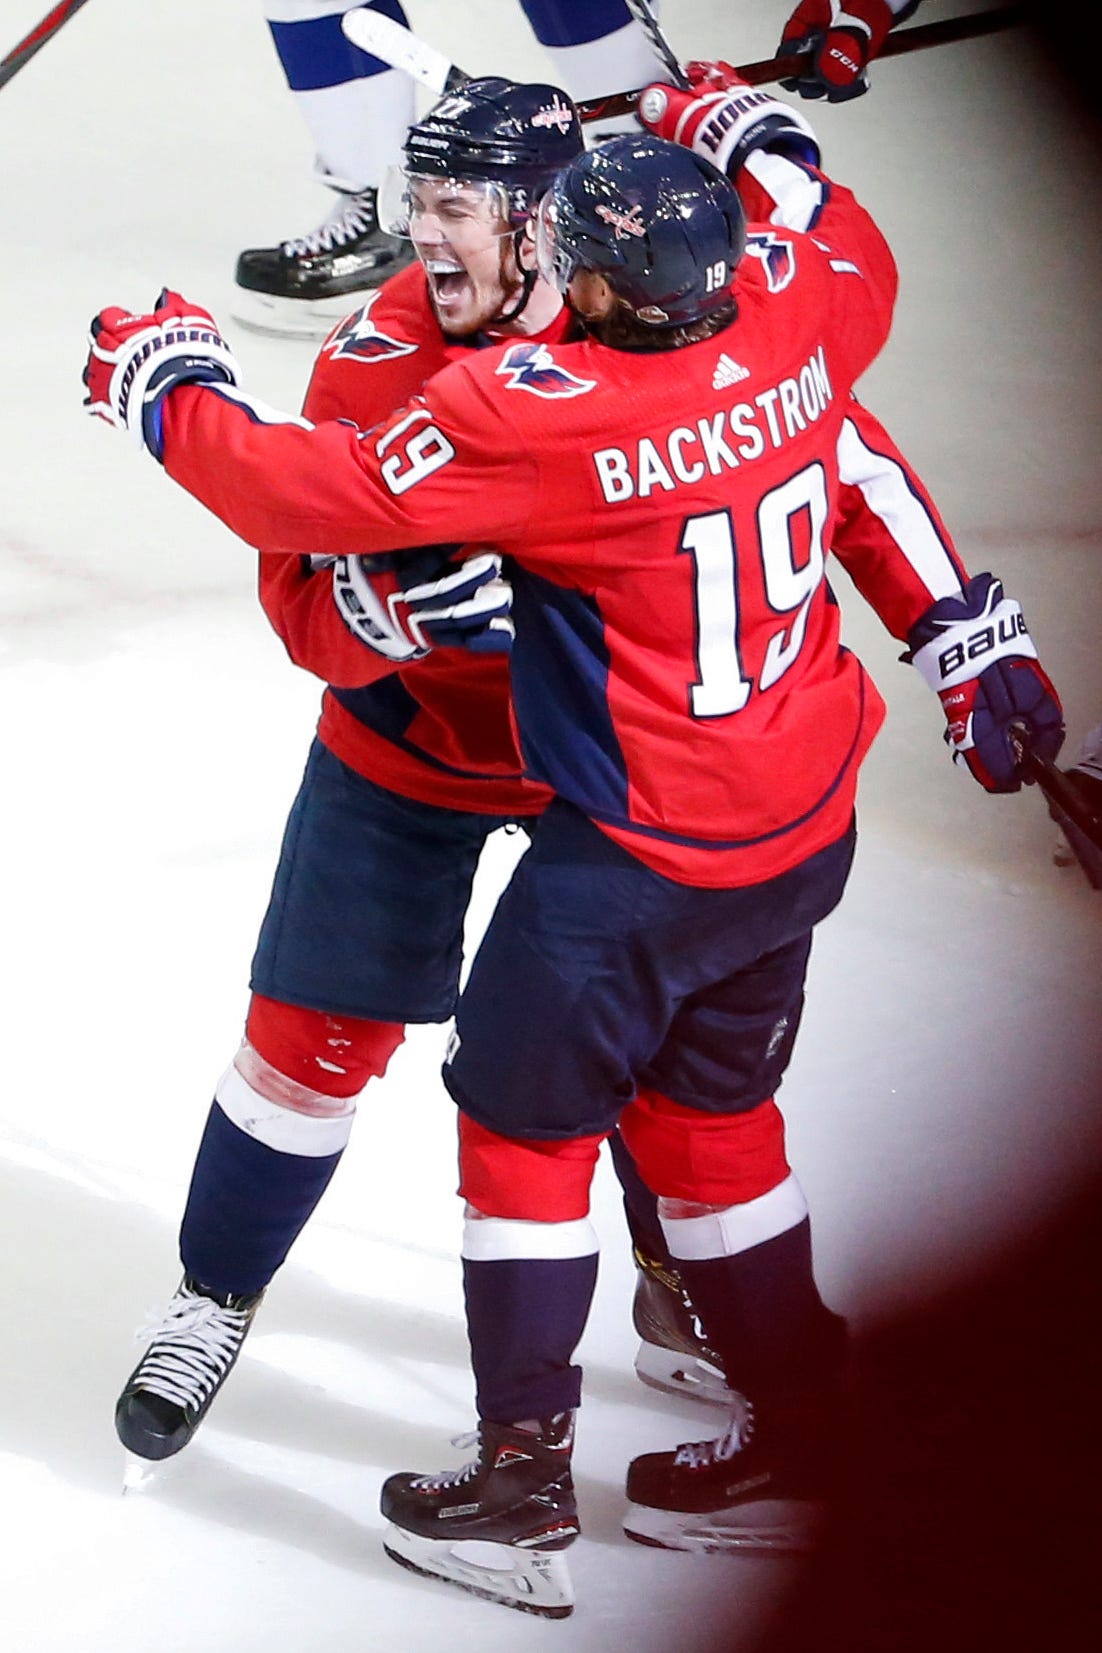 Washington Capitals right wing T.J. Oshie, left, celebrates his goal with Washington Capitals center Nicklas Backstrom during the second period in game six of the Eastern Conference Final against the Tampa Bay Lightning in the 2018 Stanley Cup Playof